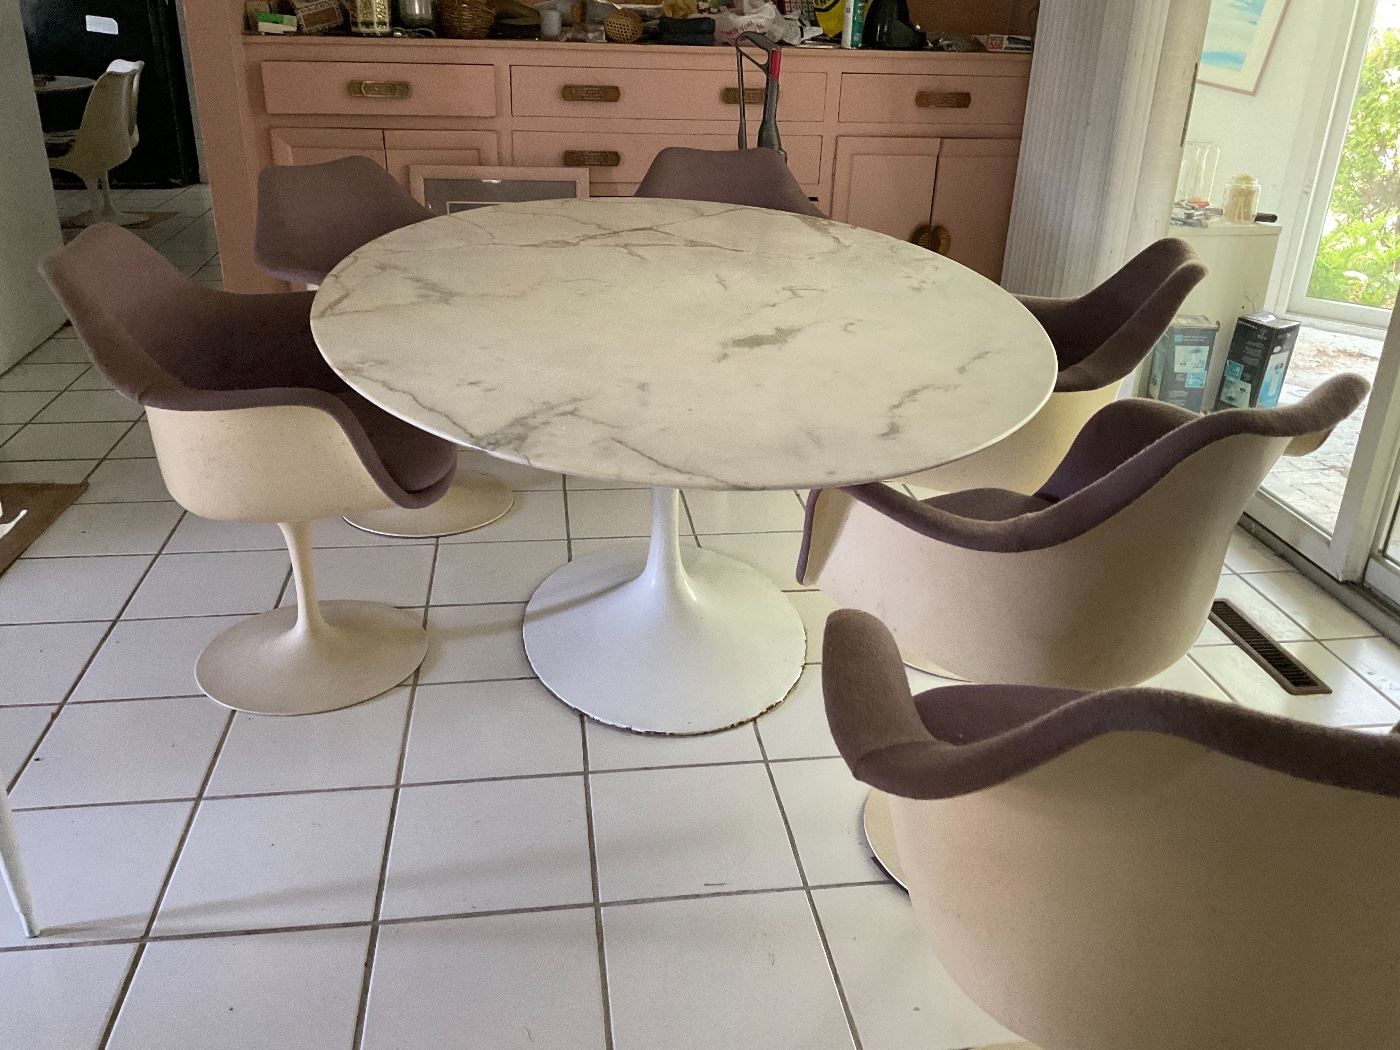 Vintage Mid-century modern Knoll Saaranen Marble Top Oval Dining Tables. Knoll Tulip Style Chairs (6).